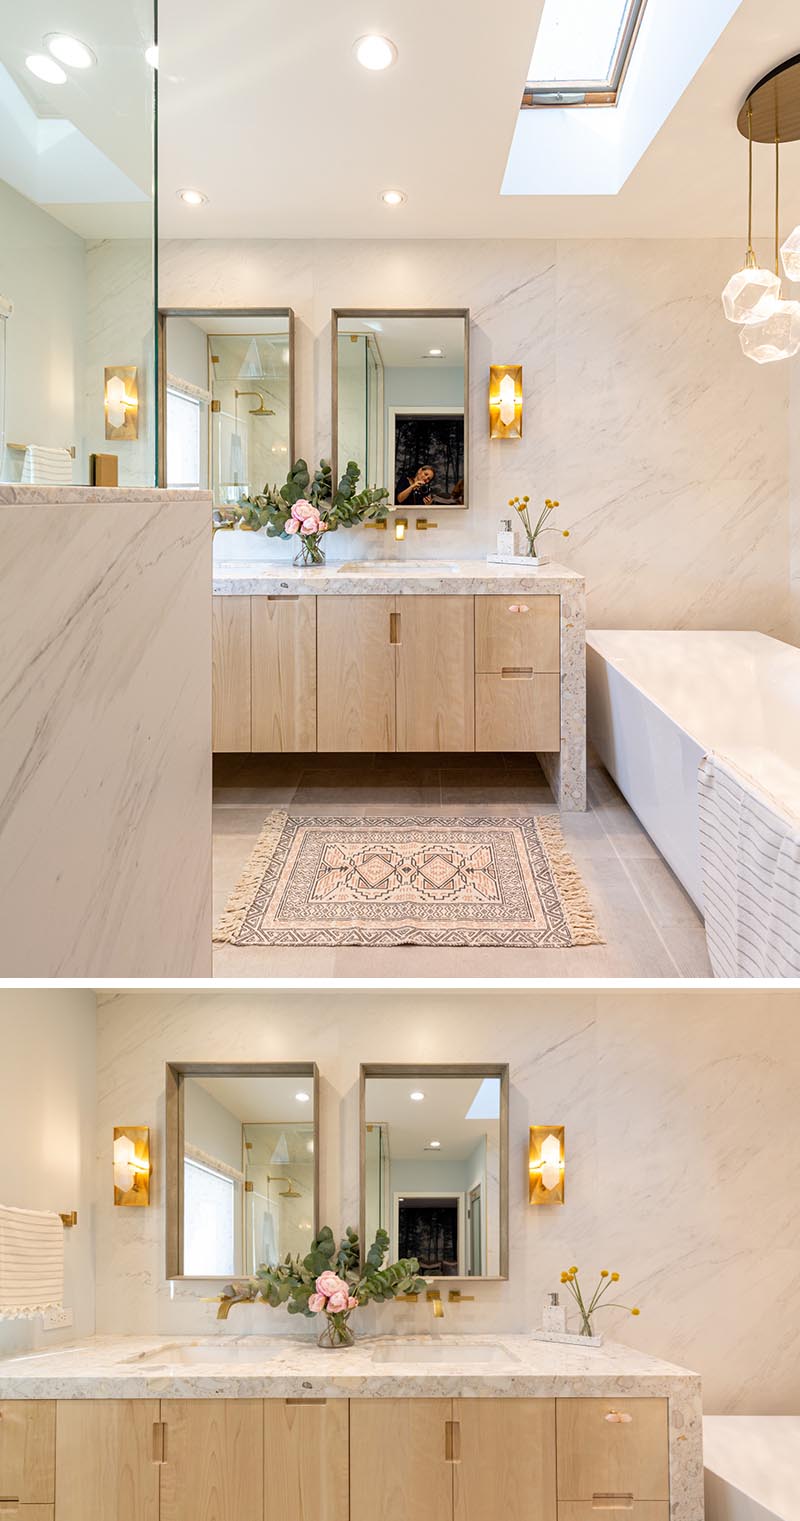 The soft color palette of this modern bathroom plays well with the floral and brass accents throughout. The wood vanity cabinets are hardware free, with just finger notches providing access to the storage within. #ModernBathroom #BathroomDesign #Skylight #Vanity